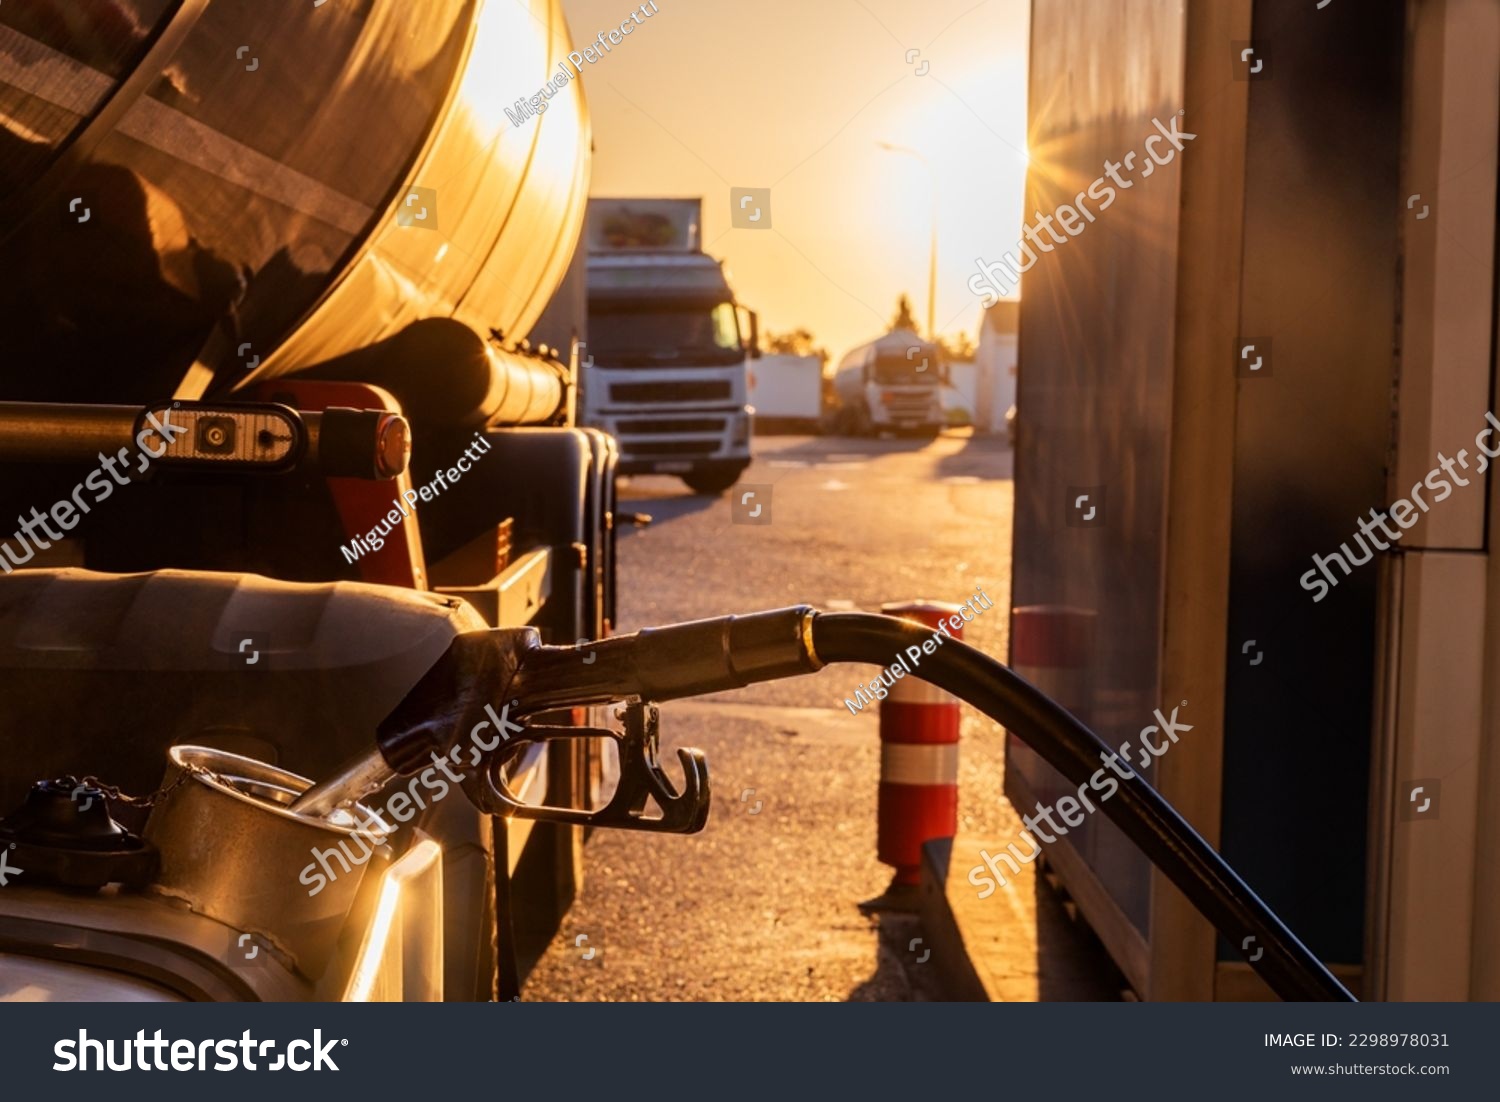 Filling the fuel tank of a truck at a gas station. #2298978031